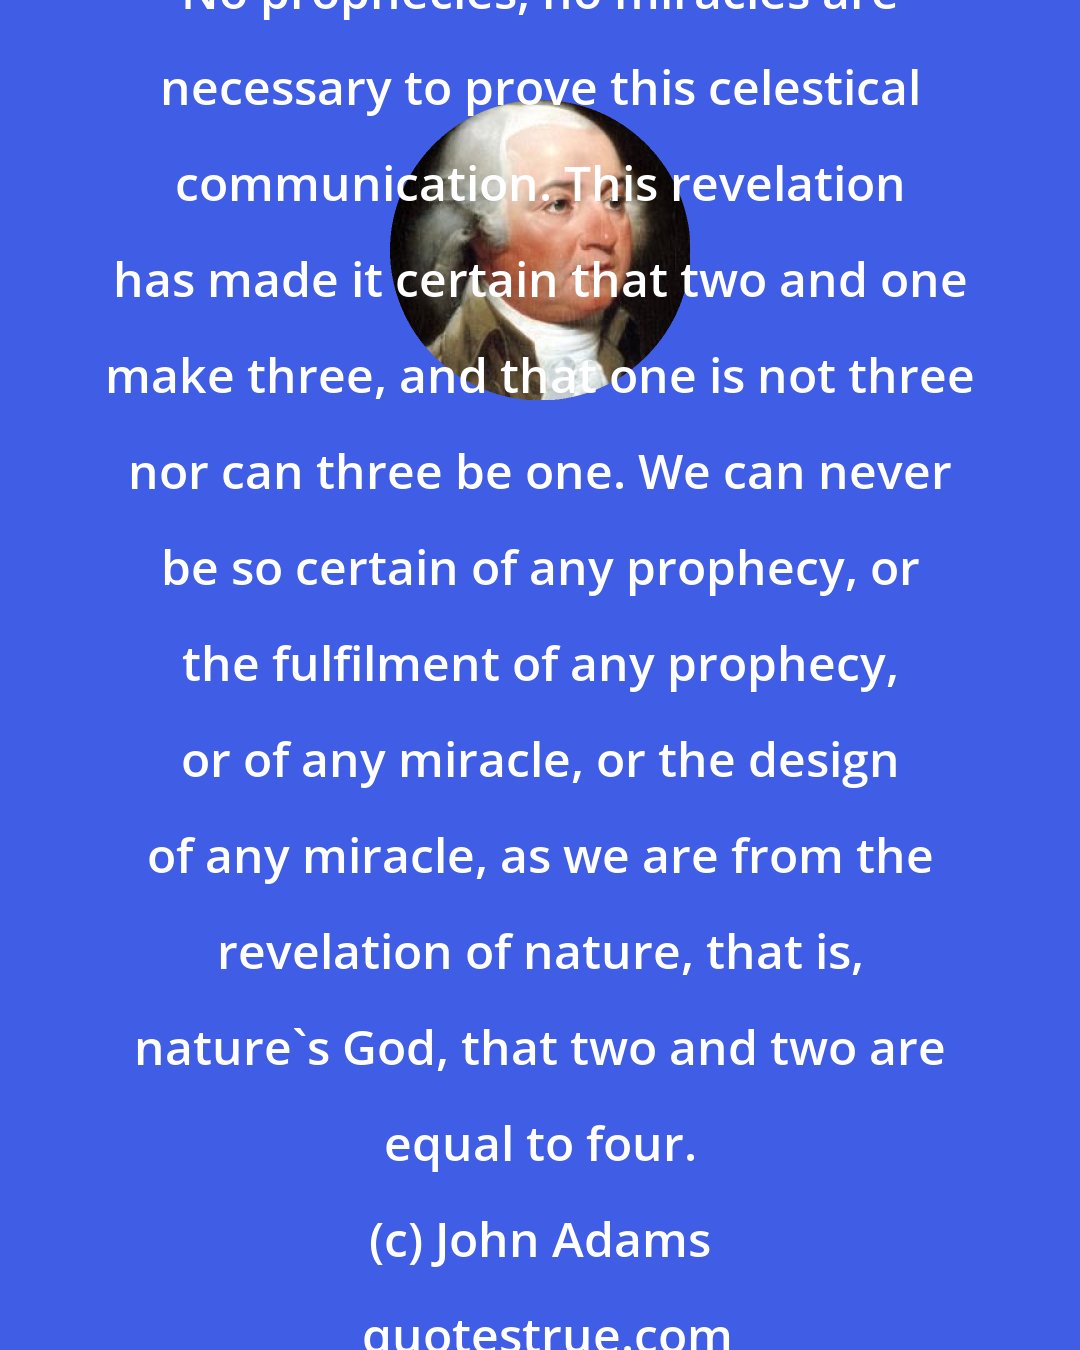 John Adams: The human understanding is a revelation from its maker, which can never be disputed or doubted. There can be no scepticism, Pyrrhonism, or incredulity or infidelity here. No prophecies, no miracles are necessary to prove this celestical communication. This revelation has made it certain that two and one make three, and that one is not three nor can three be one. We can never be so certain of any prophecy, or the fulfilment of any prophecy, or of any miracle, or the design of any miracle, as we are from the revelation of nature, that is, nature's God, that two and two are equal to four.